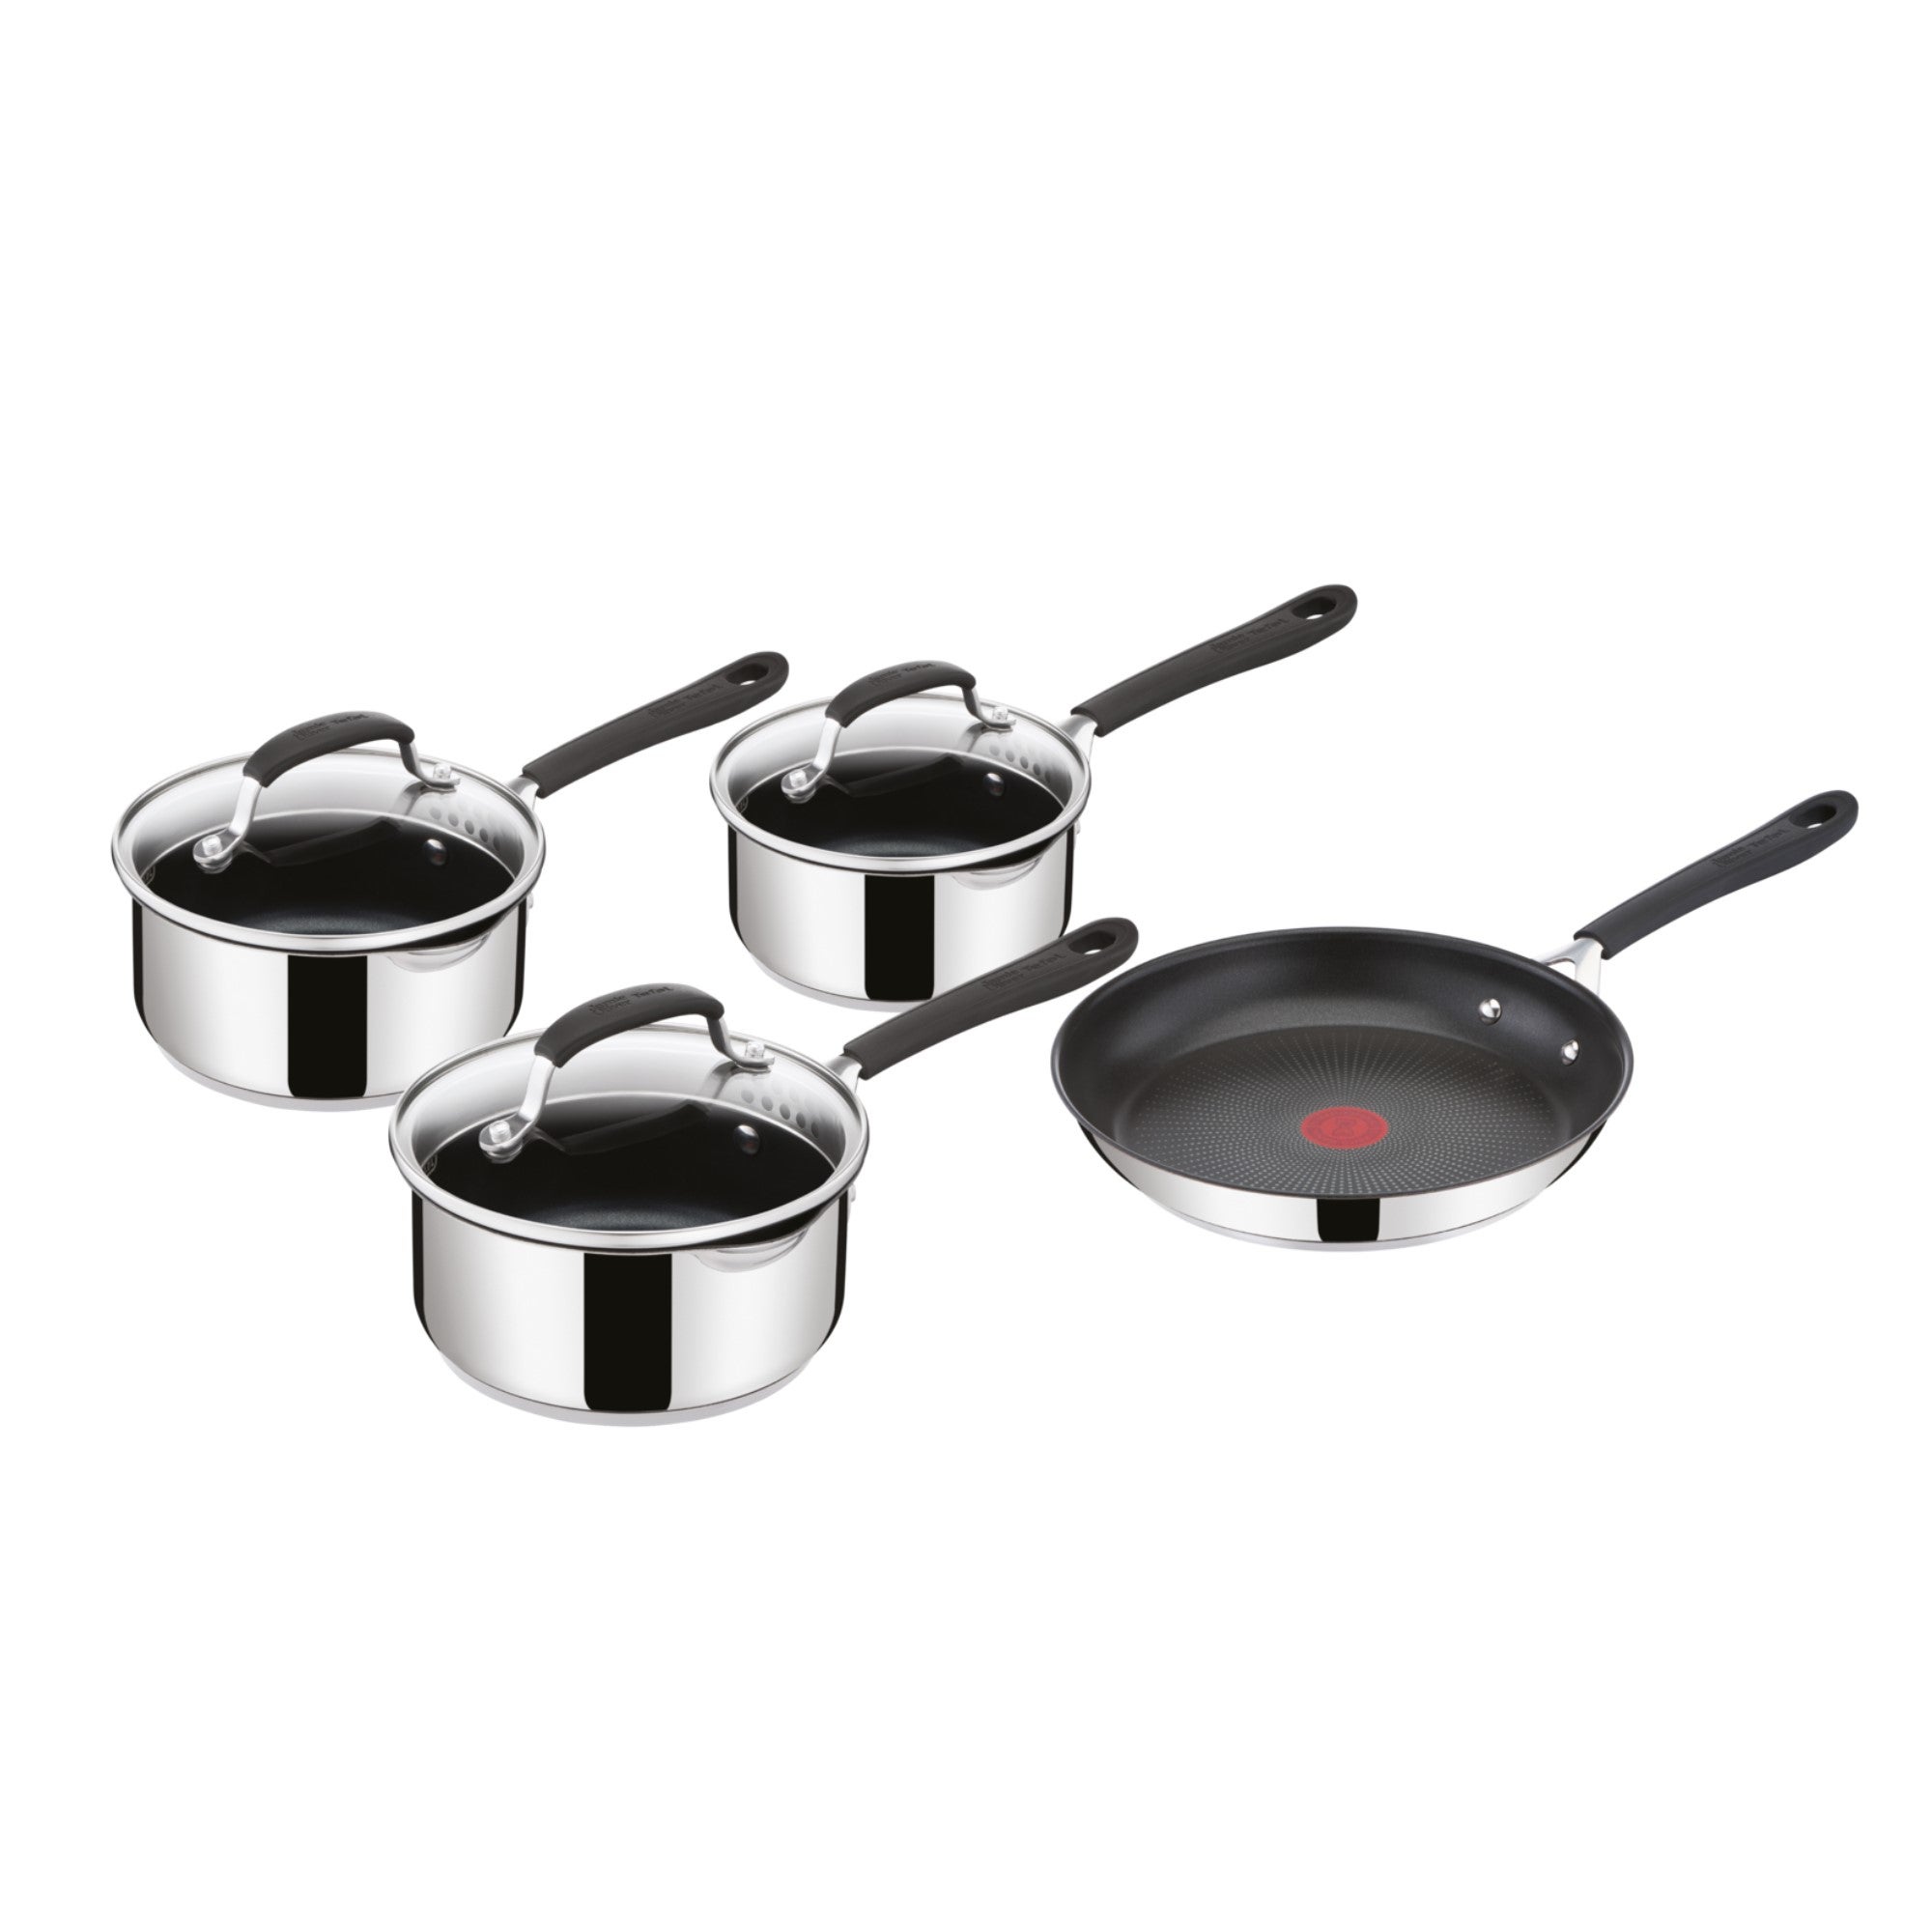 Jamie Oliver by Tefal Quick & Easy Stainless Steel 4 Piece Pan Set